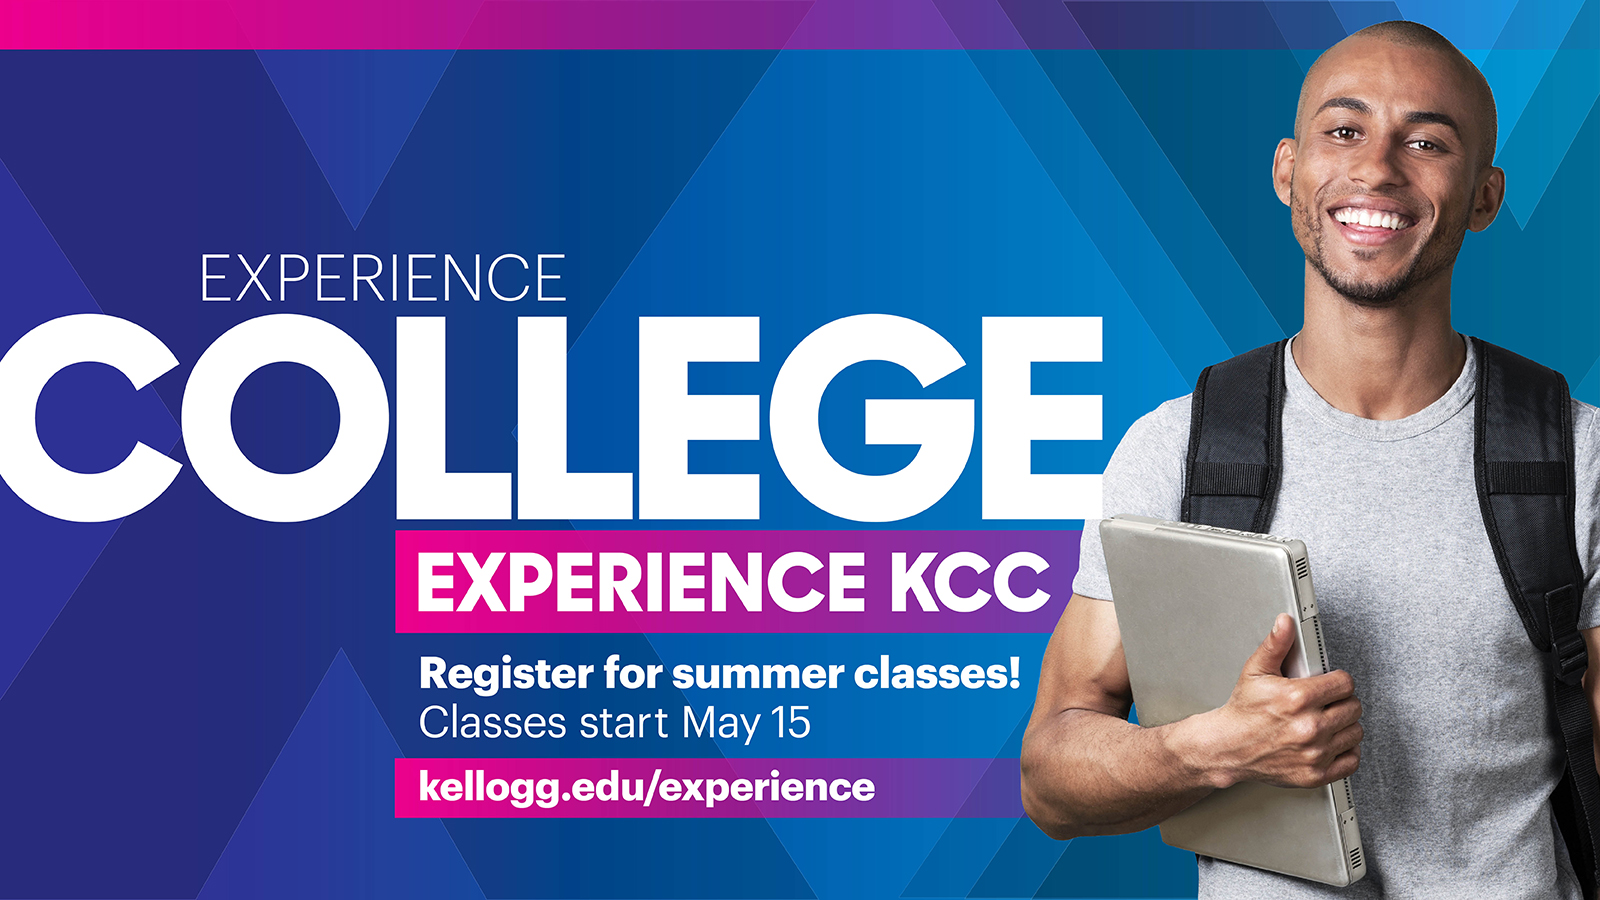 A young man smiles on a text slide that reads, "Experience college. Experience KCC. Register for summer classes! Classes start May 15. kellogg.edu/experience."